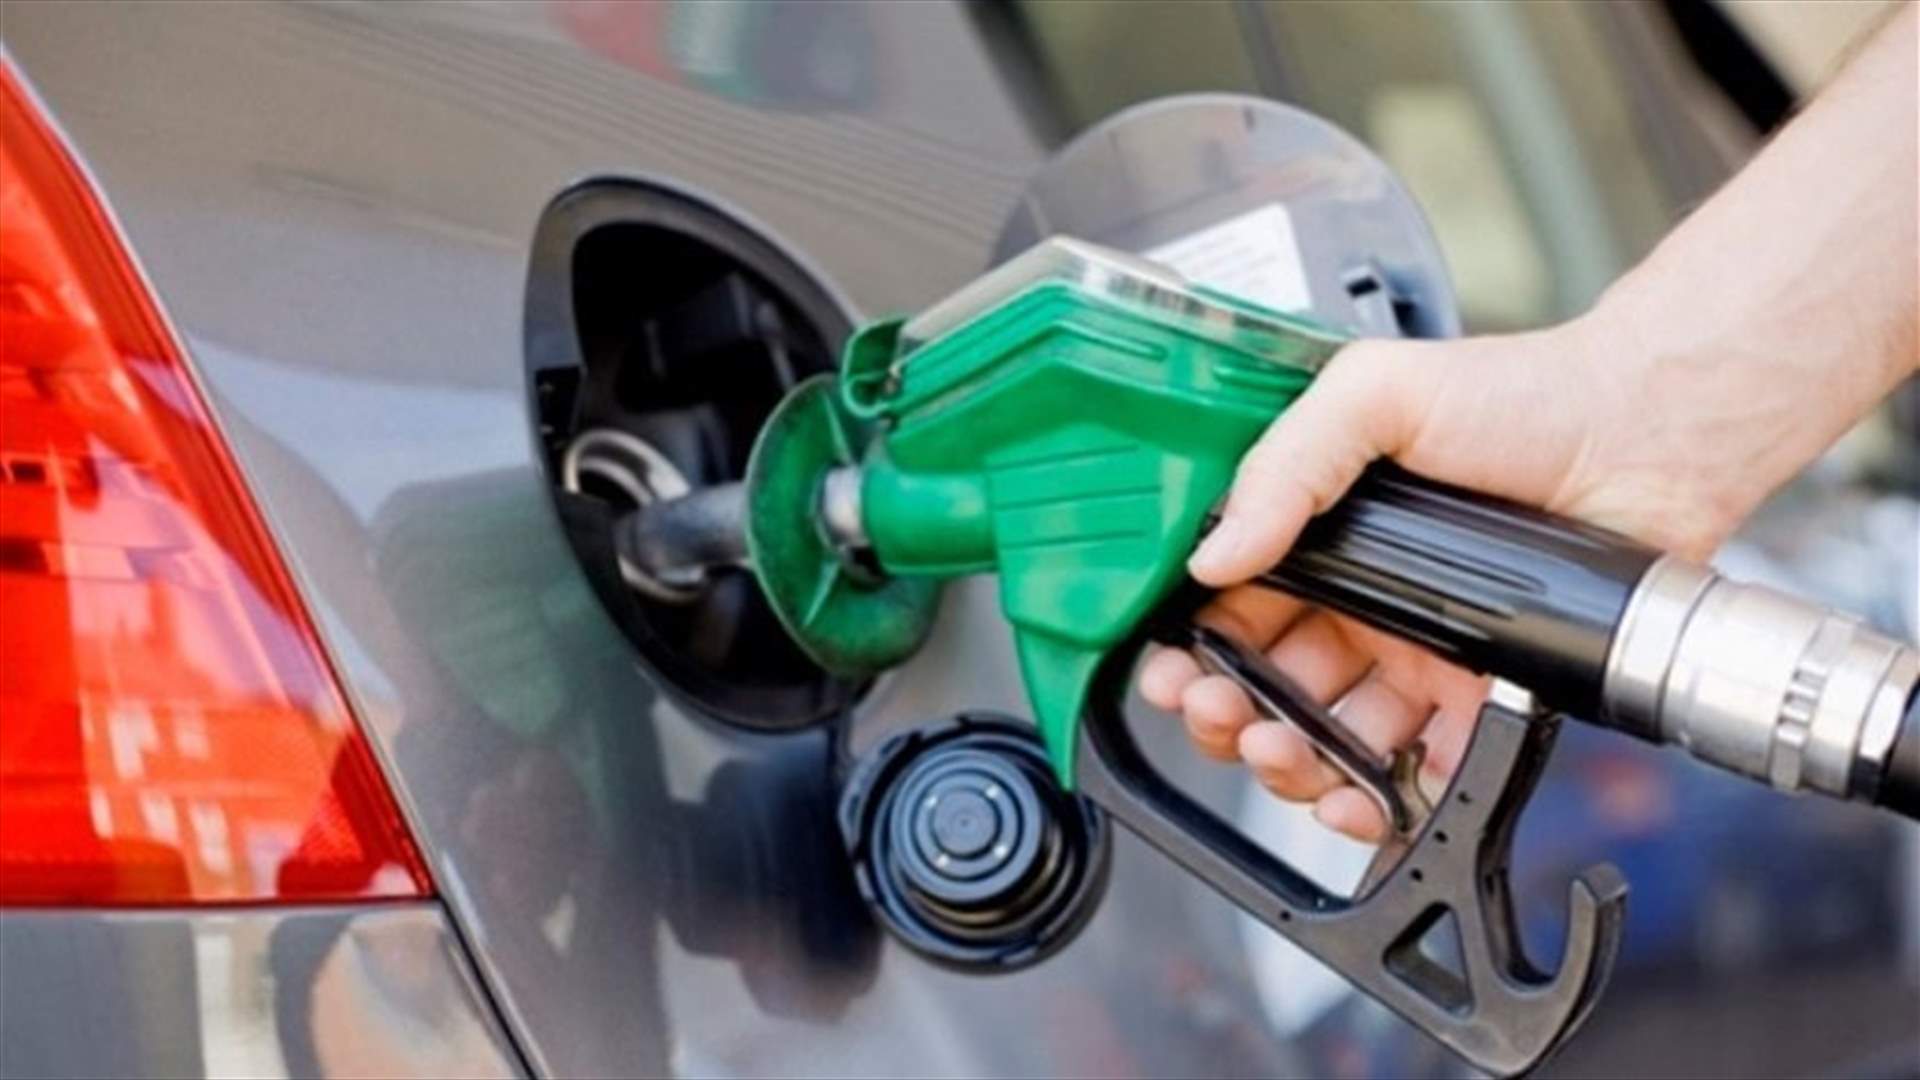 Fuel prices in Lebanon continue to increase